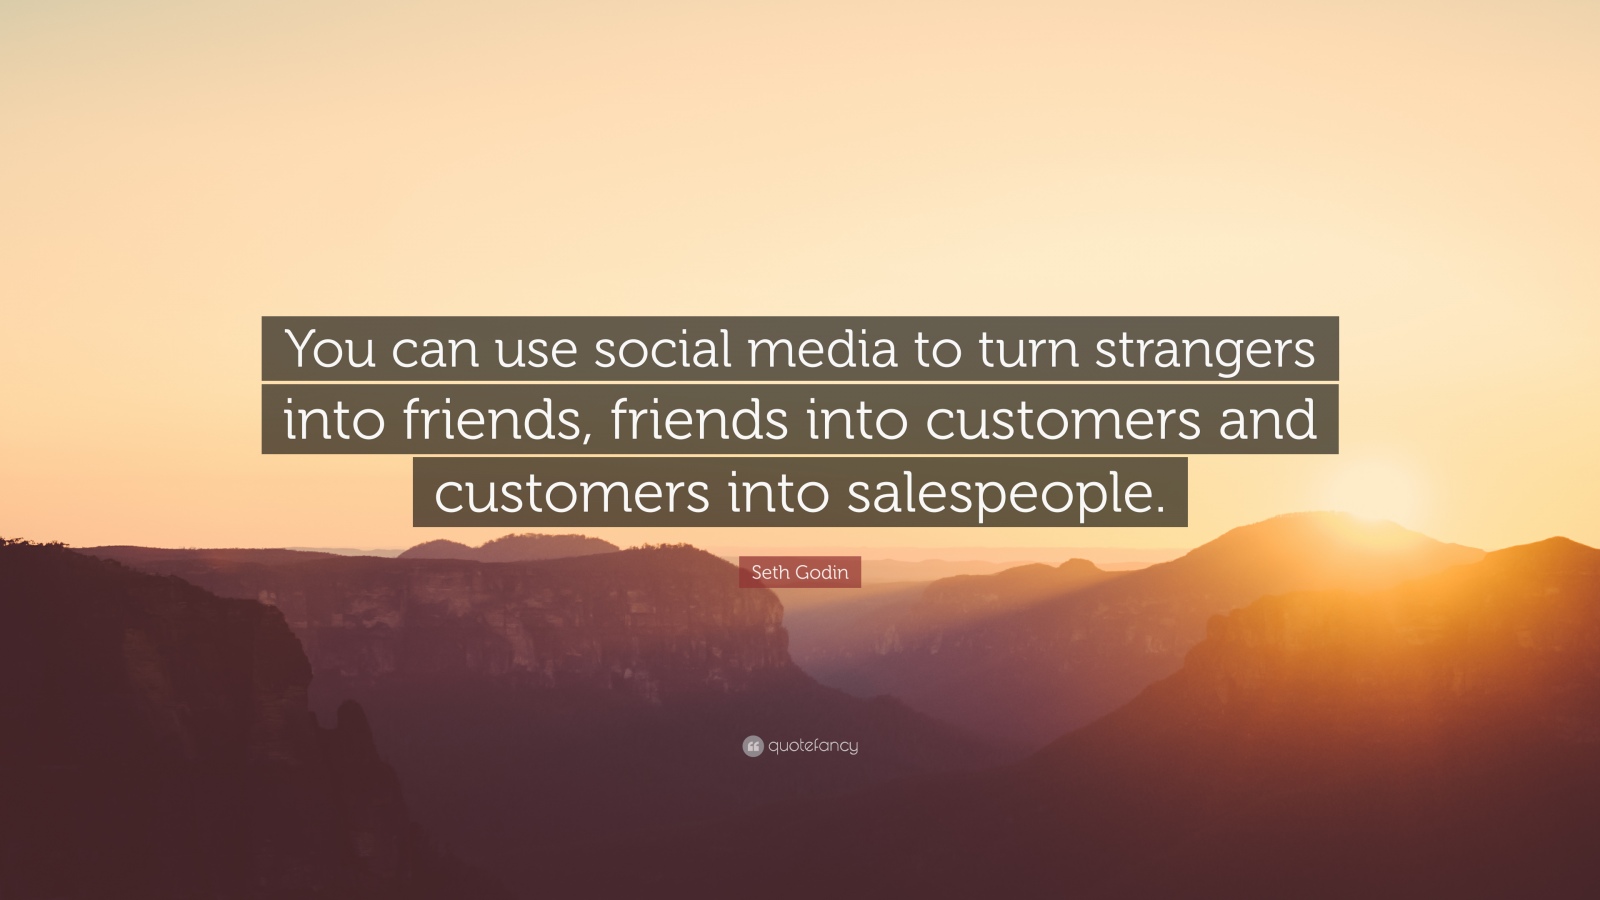 10 Quotes We Love About Social Media